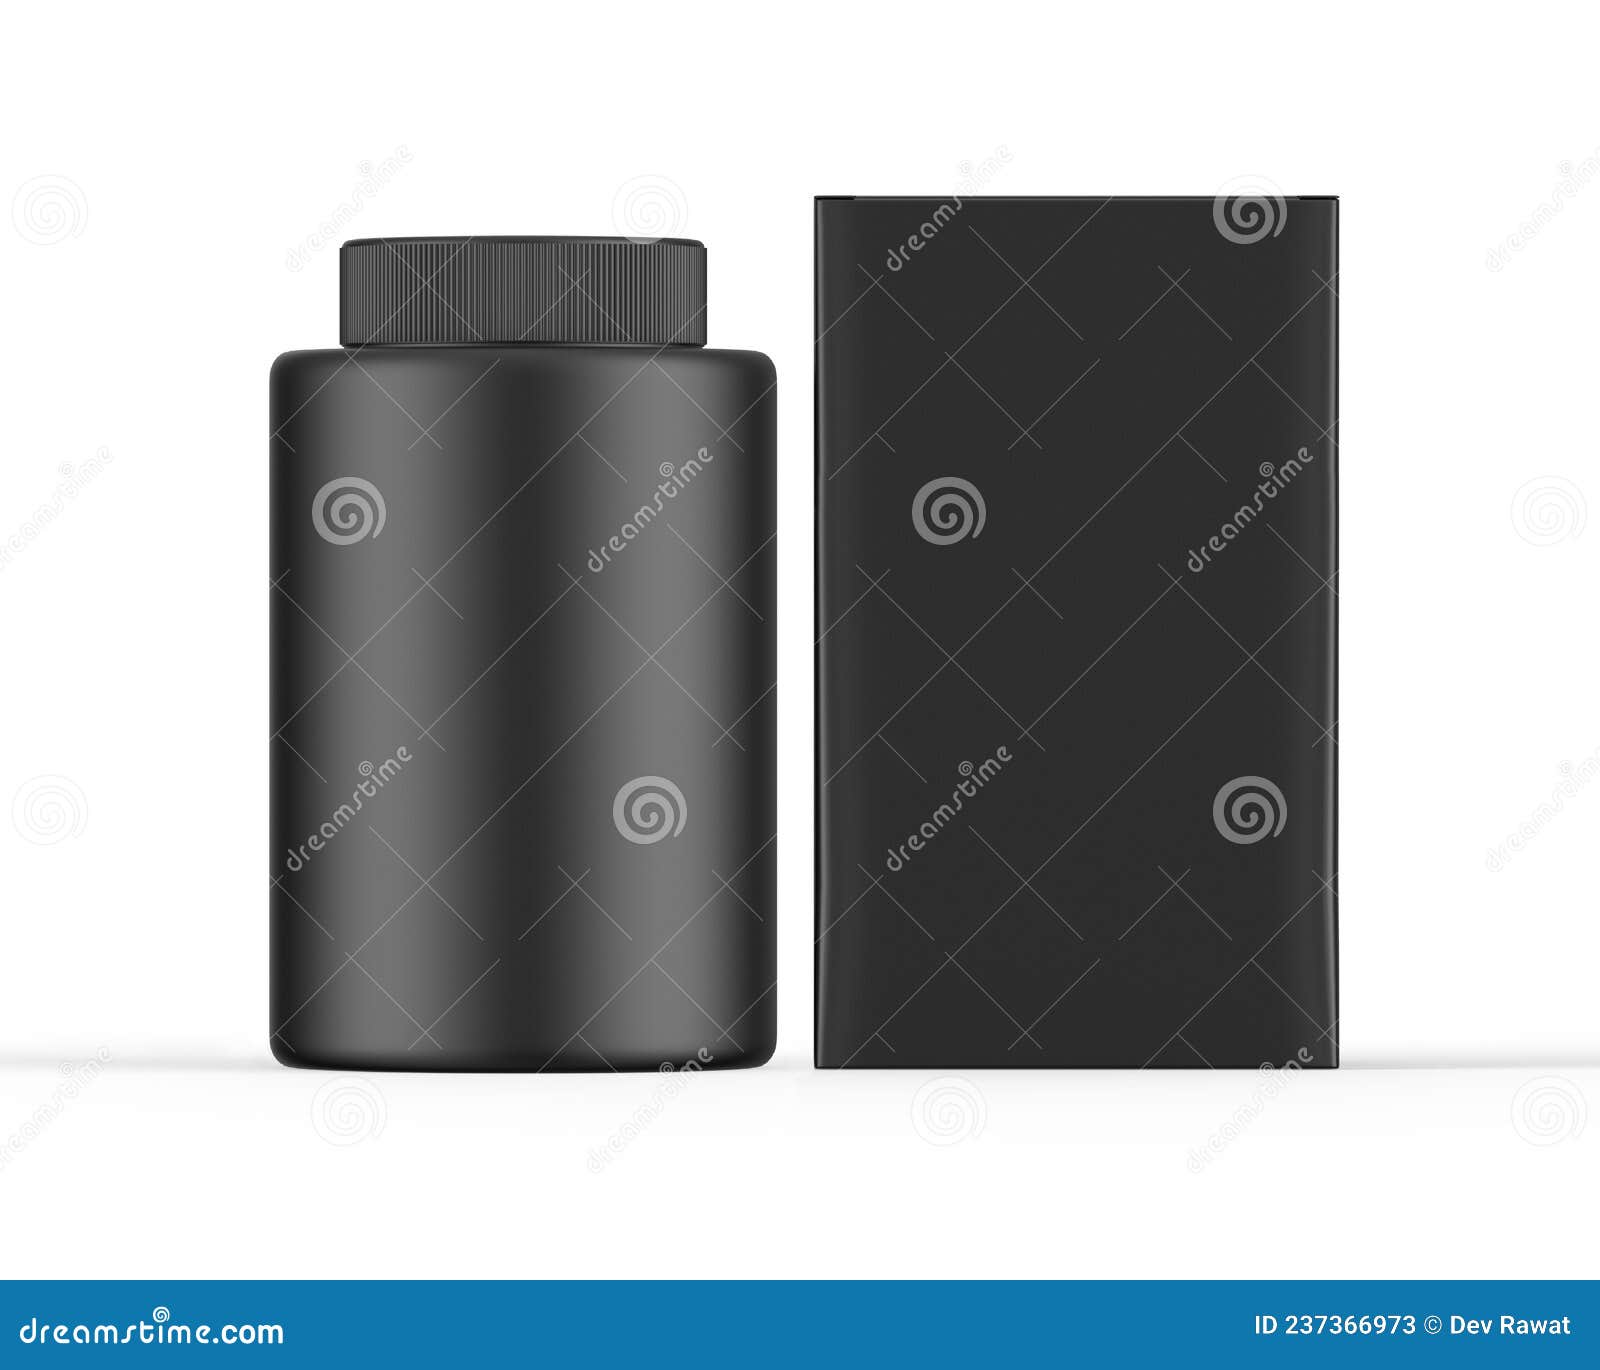 Black protein powder container with red lid Vector Image